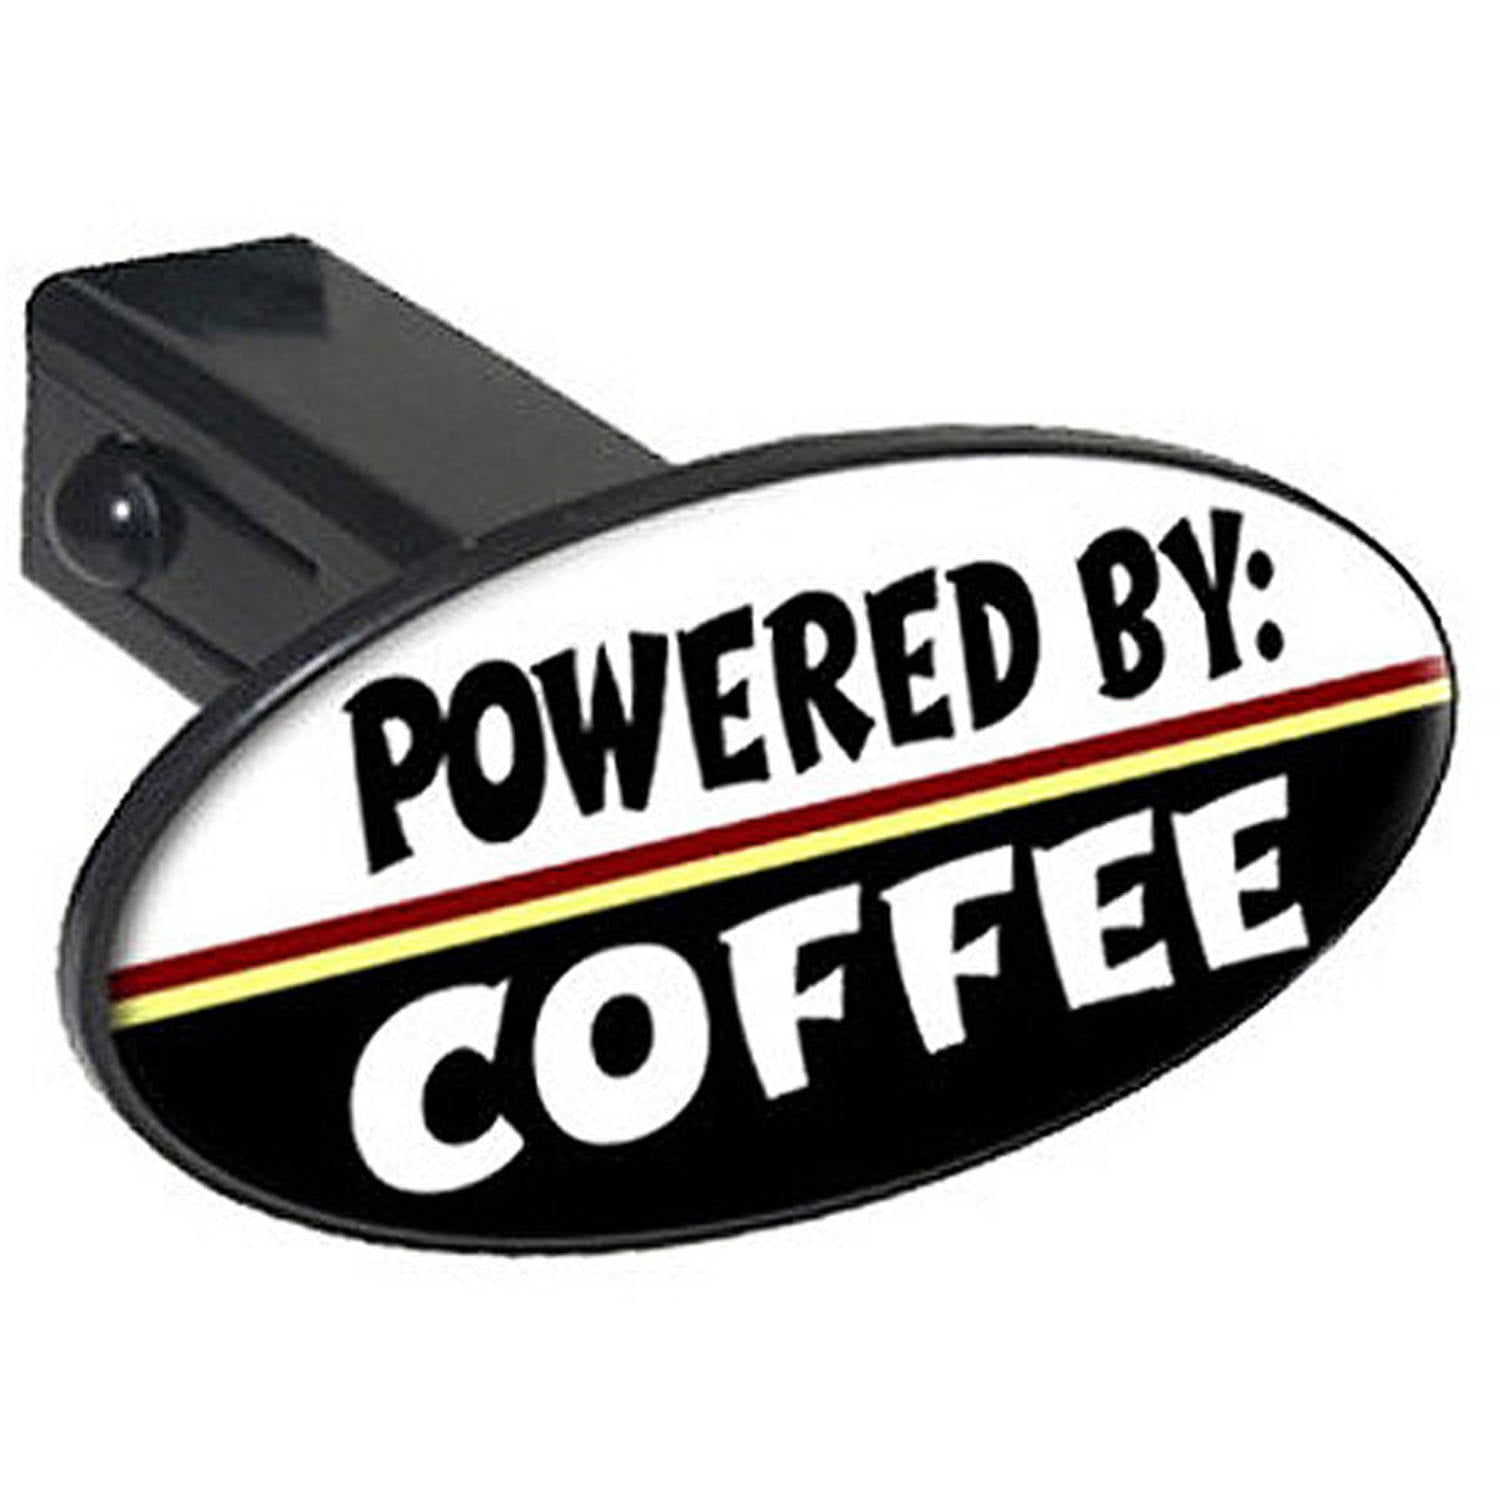 Powered By Coffee 1.25" Oval Tow Trailer Hitch Cover Plug Insert